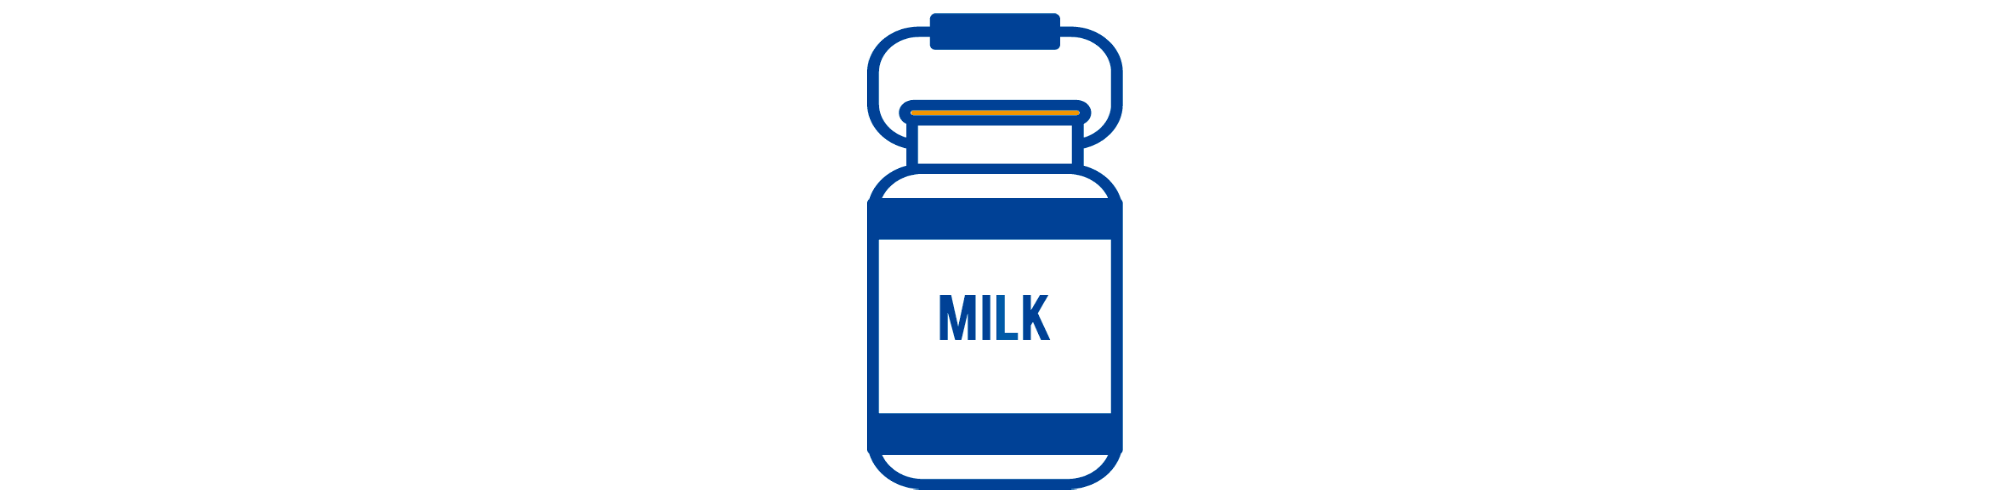 Blue icon of a milk can